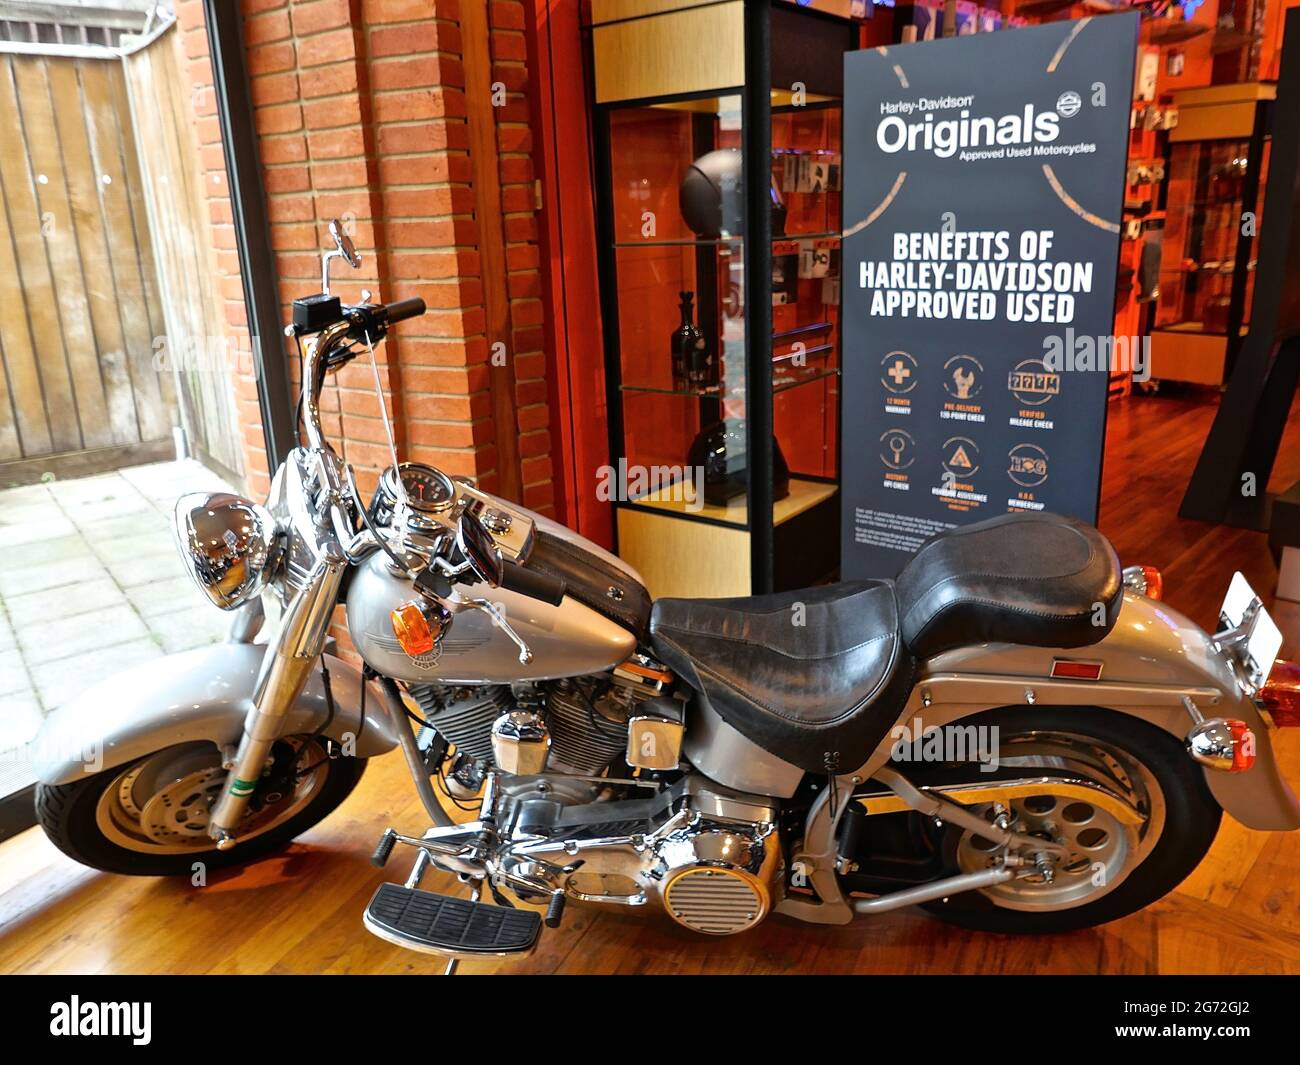 Warr S Harley Davidson Is Europe S Oldest And Biggest Selling Authorised Harley Dealership Group With Two Award Winning Sites In London Established In 1924 Our Services Including New And Used Sales Service And A